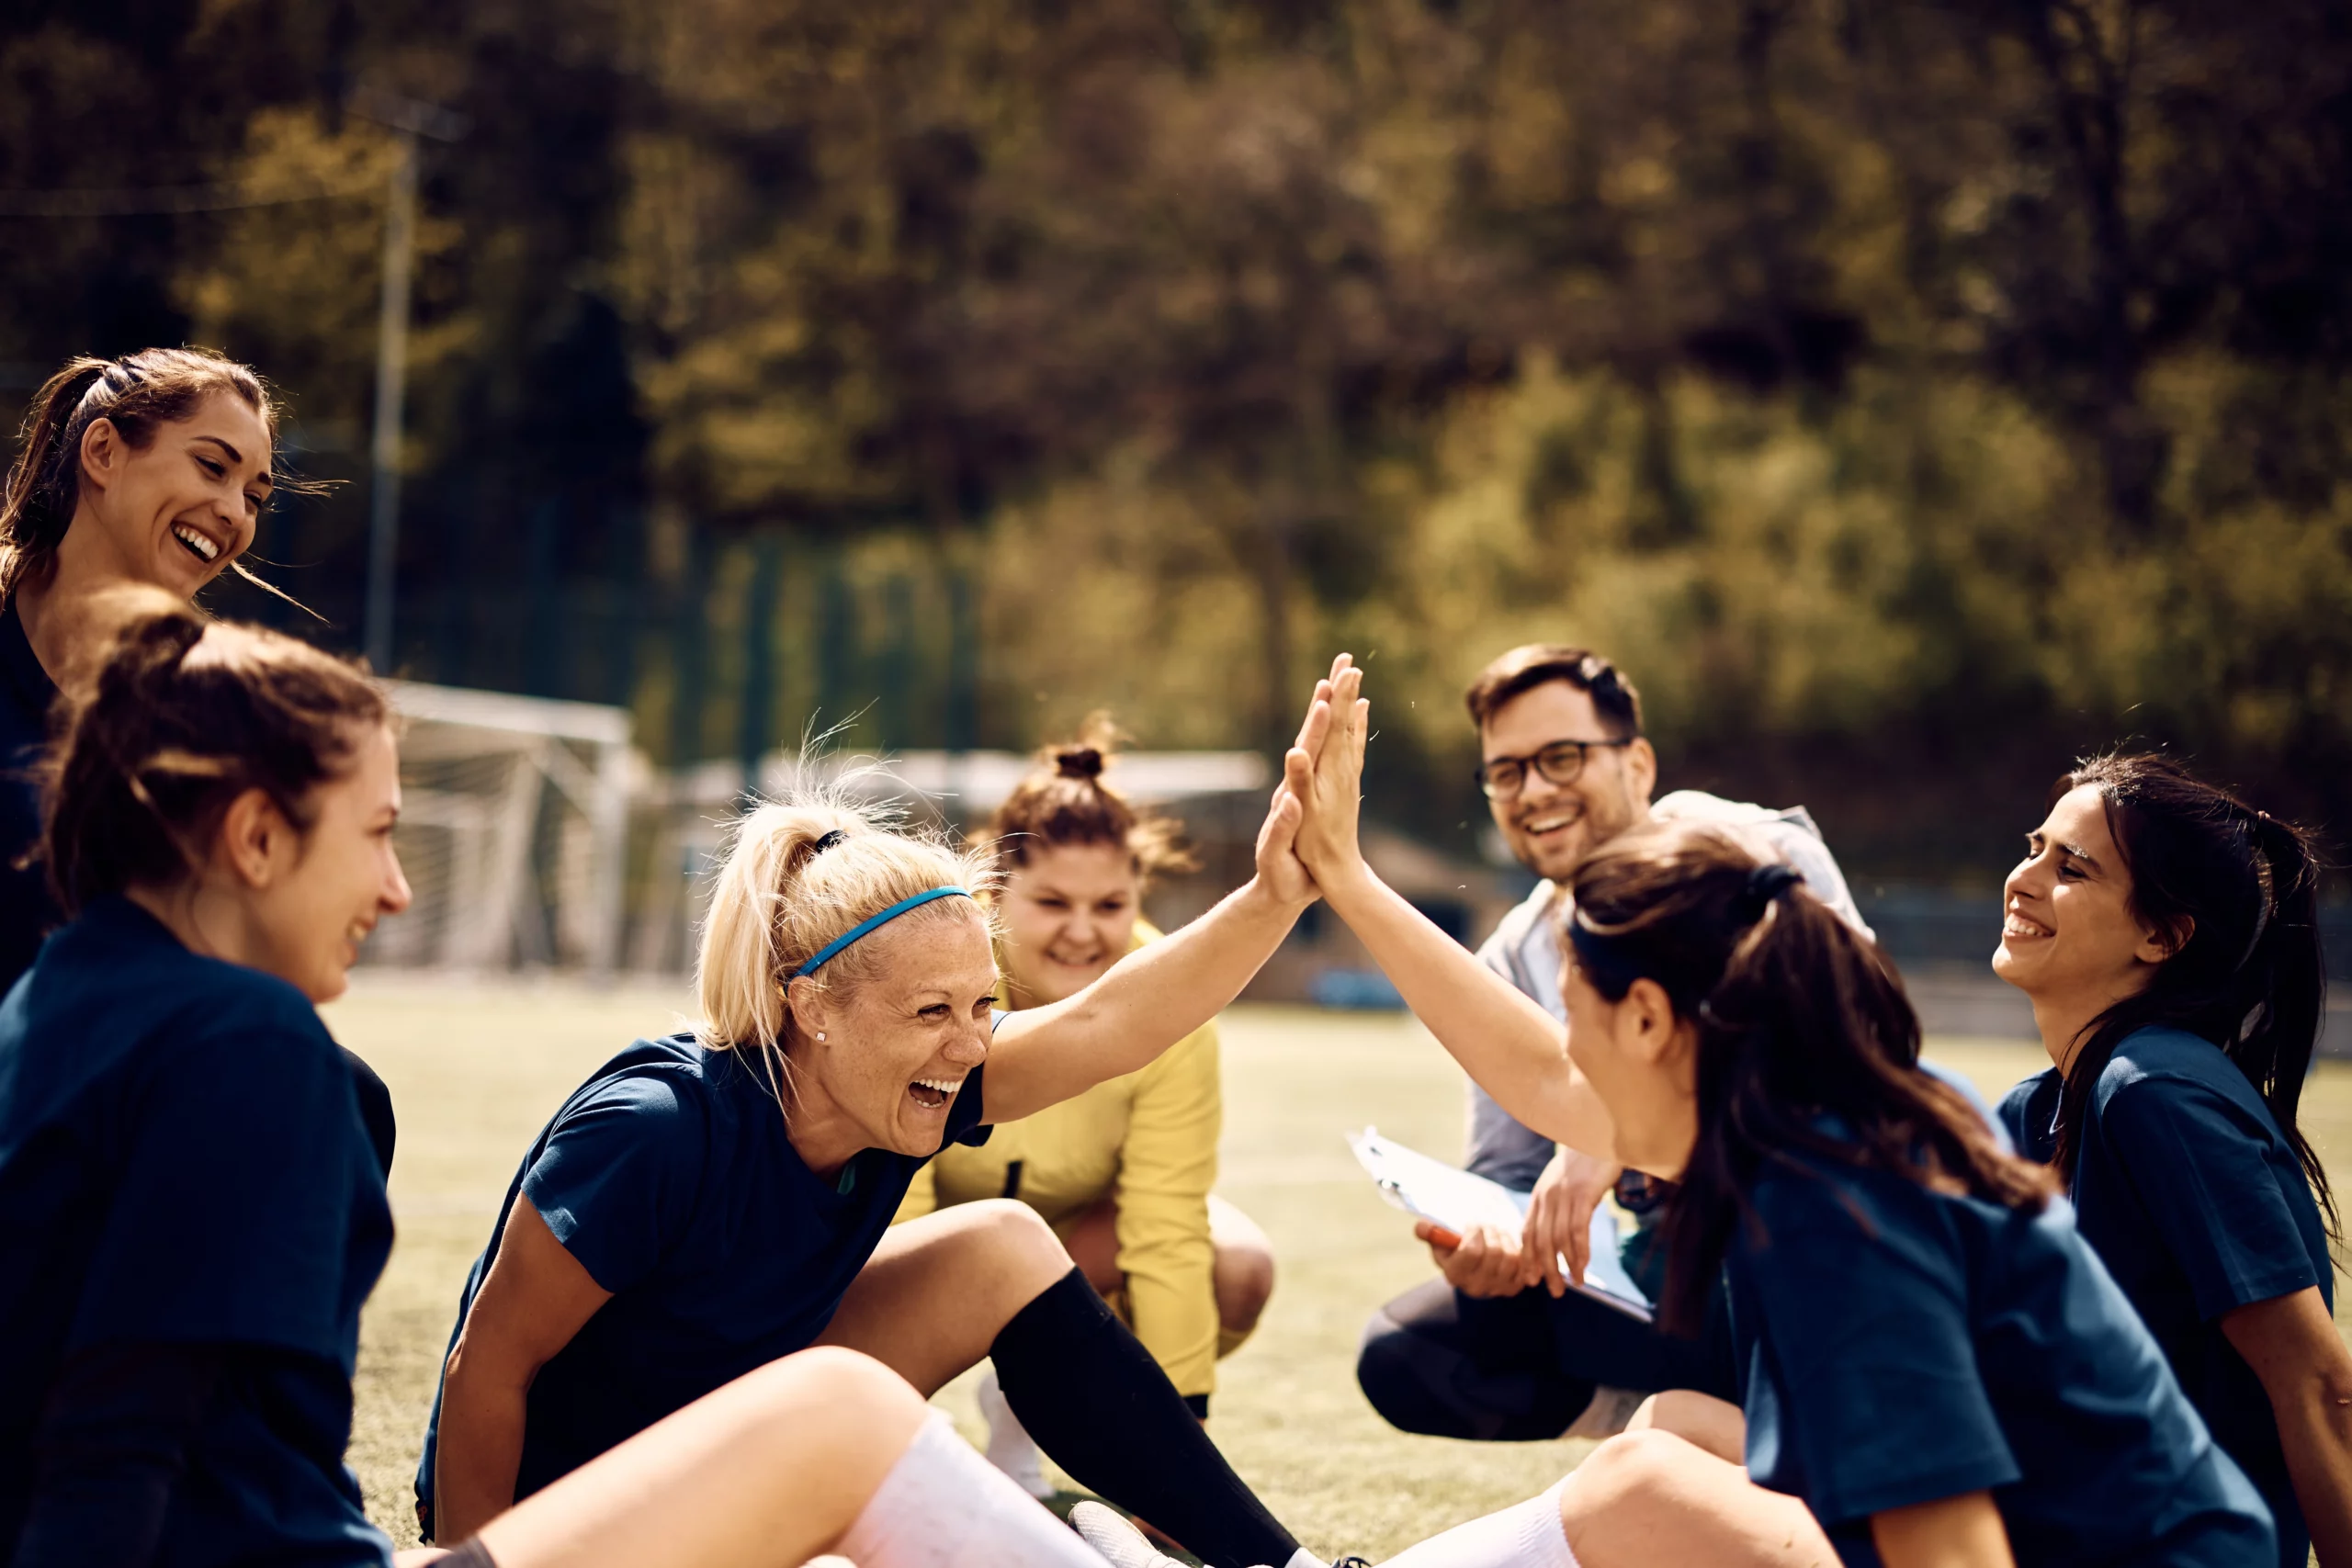 women's sports team; why is a sports payments system important? | Biz Core